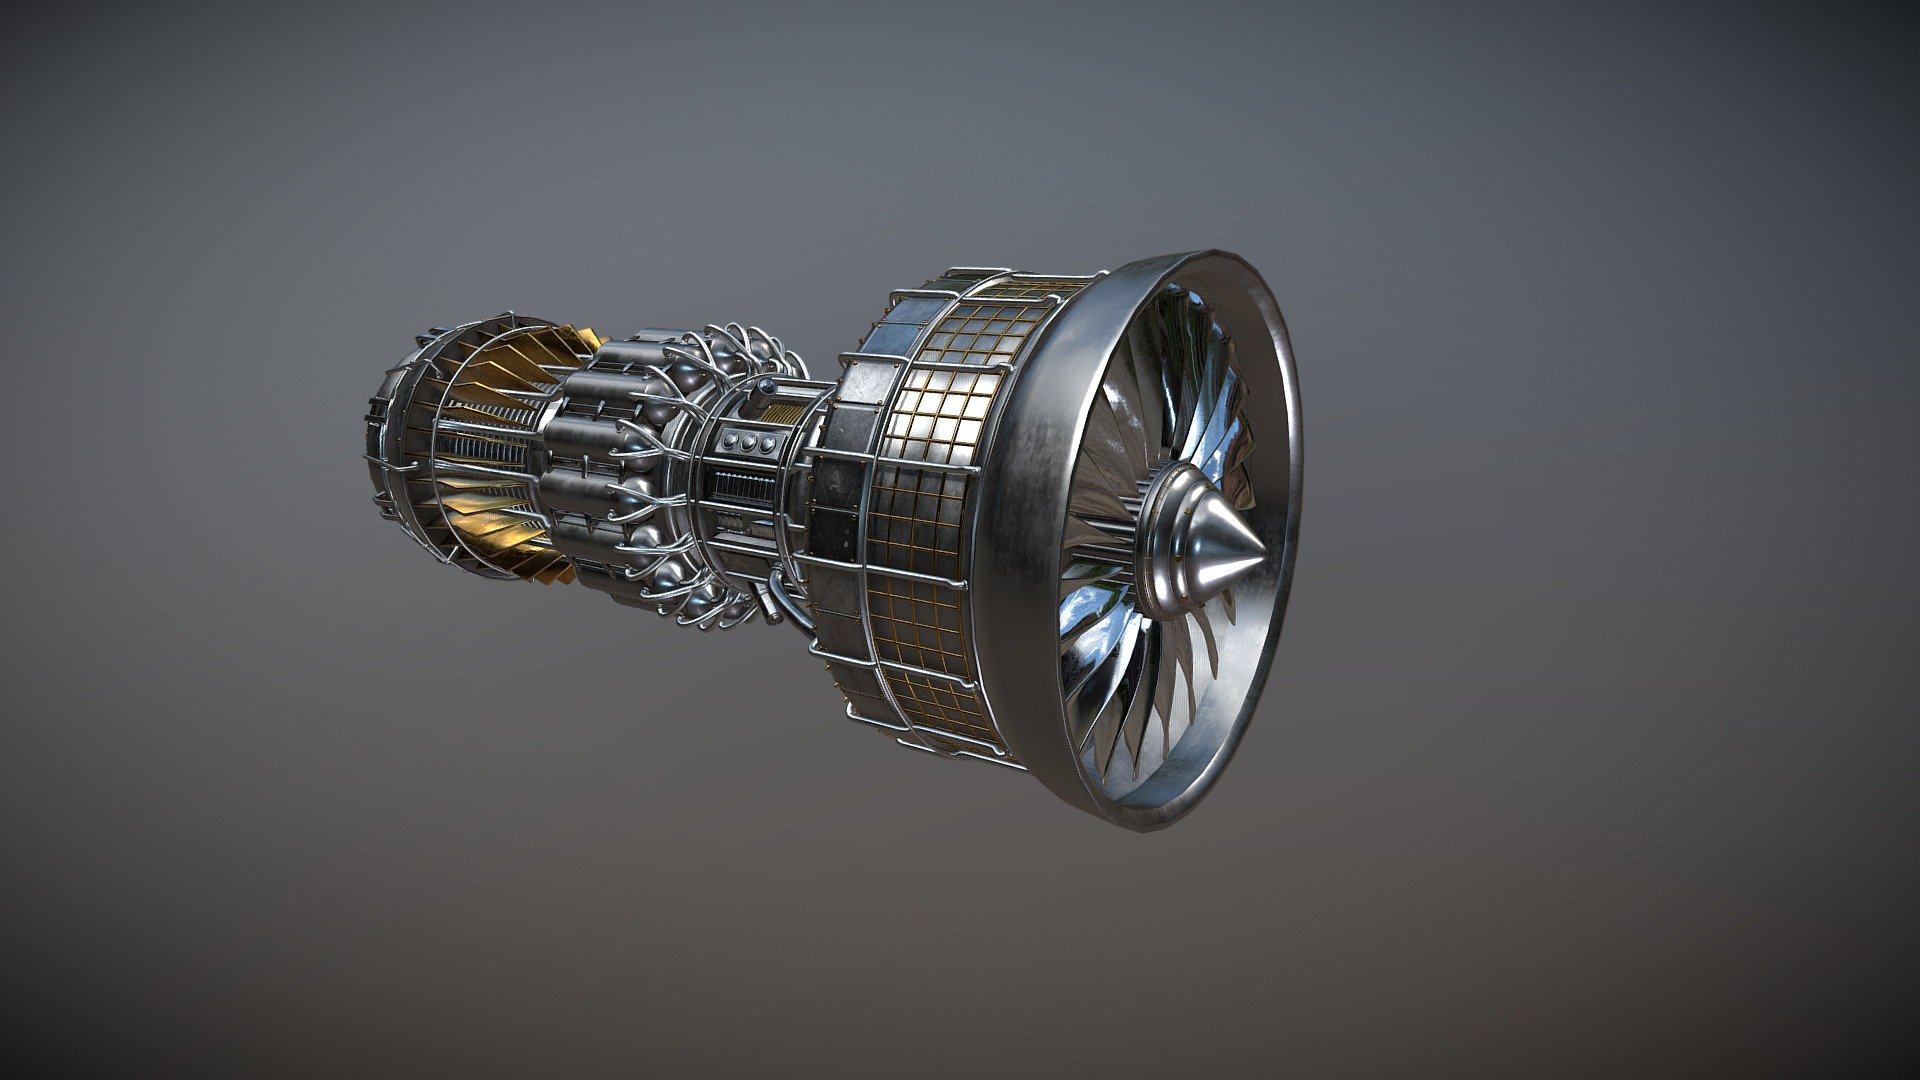 The textures are CC0 licensed and from the following websites:
https://cc0textures.com
and
https://www.cgbookcase.com - Turbine | Turbofan Engine - Download Free 3D model by blenderbirb 3d model